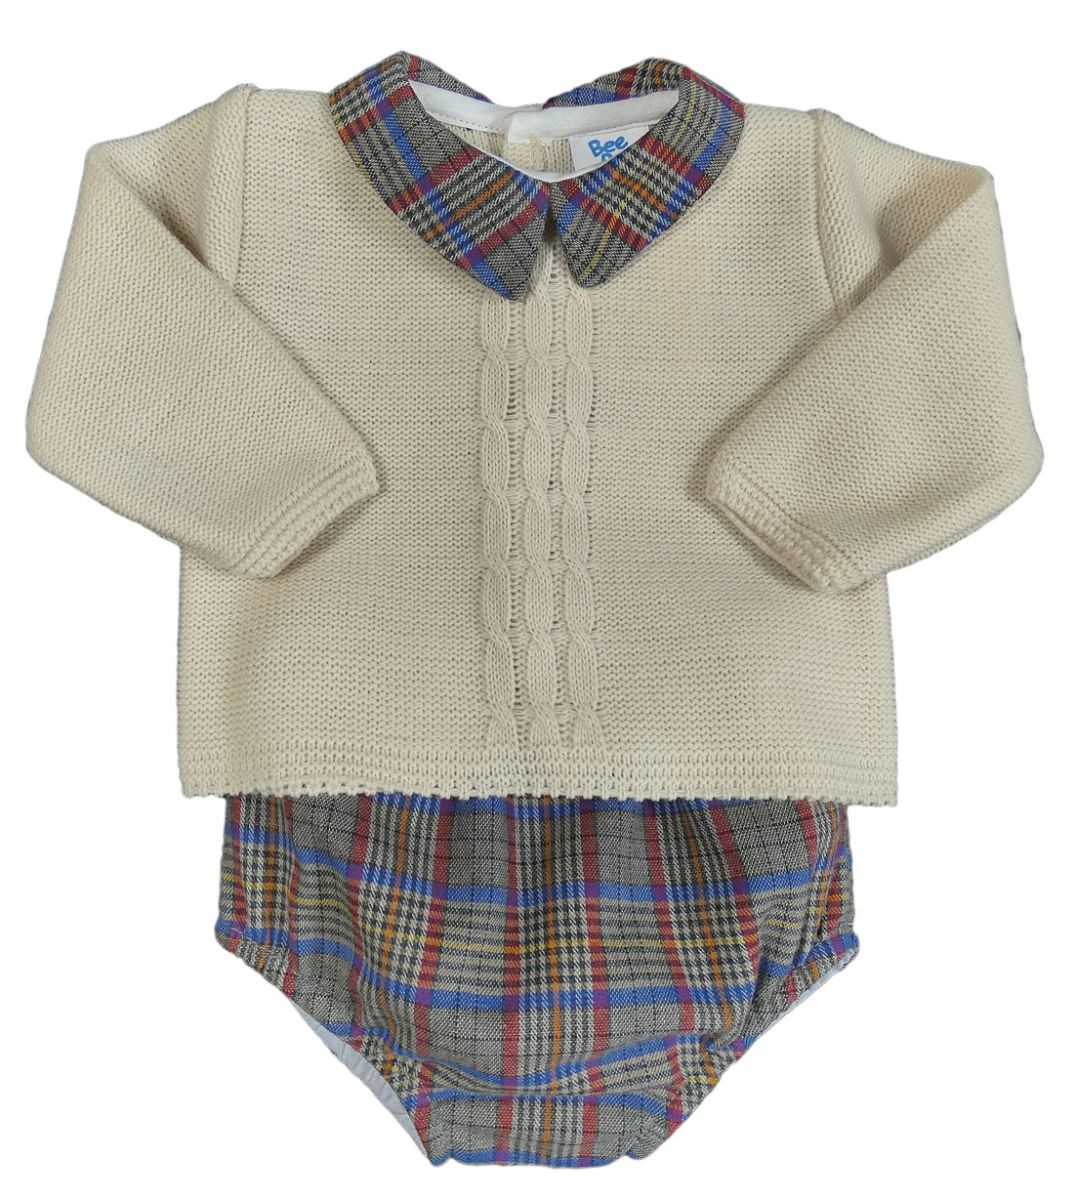 NEW Baby Girls Boys Spanish Portuguese Knitted Jumper & Tartan Jam Pants Outfit 